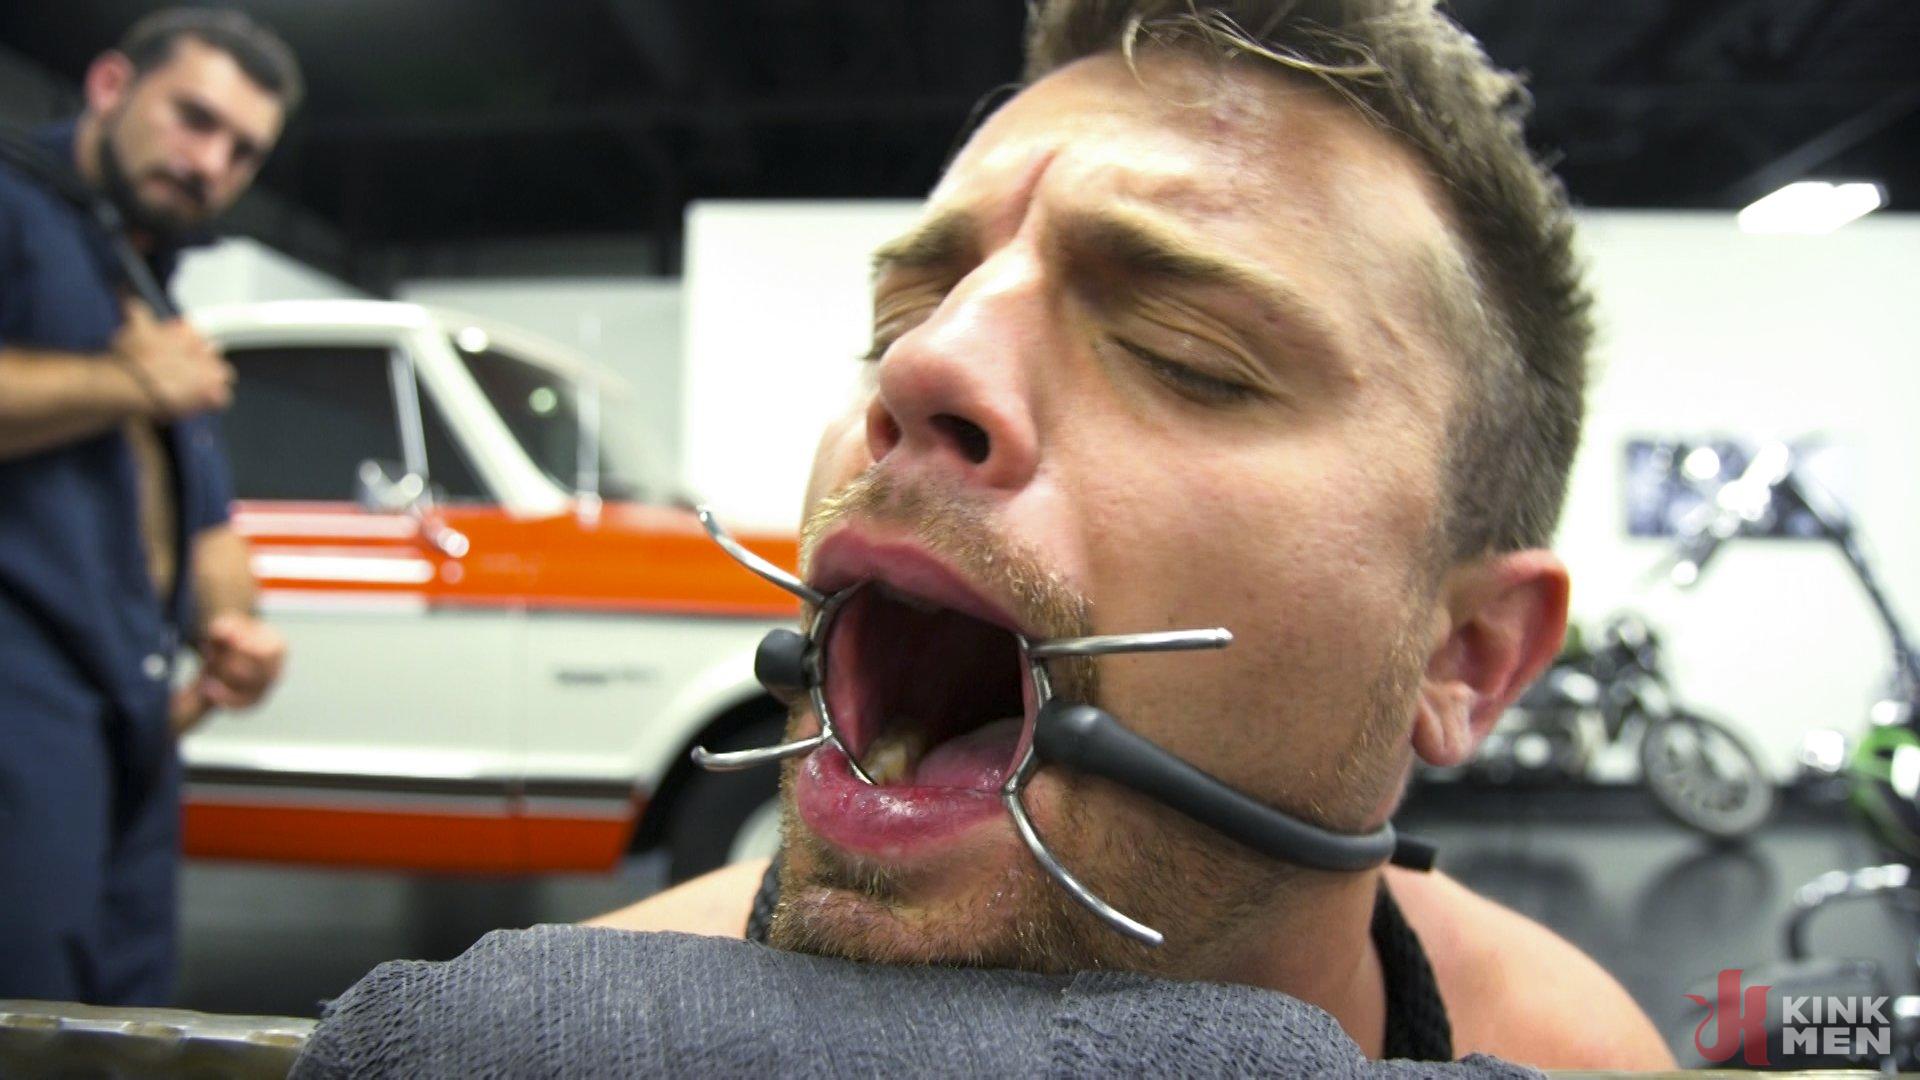 Vintage Car Bondage Porn - Abuse in the Workplace